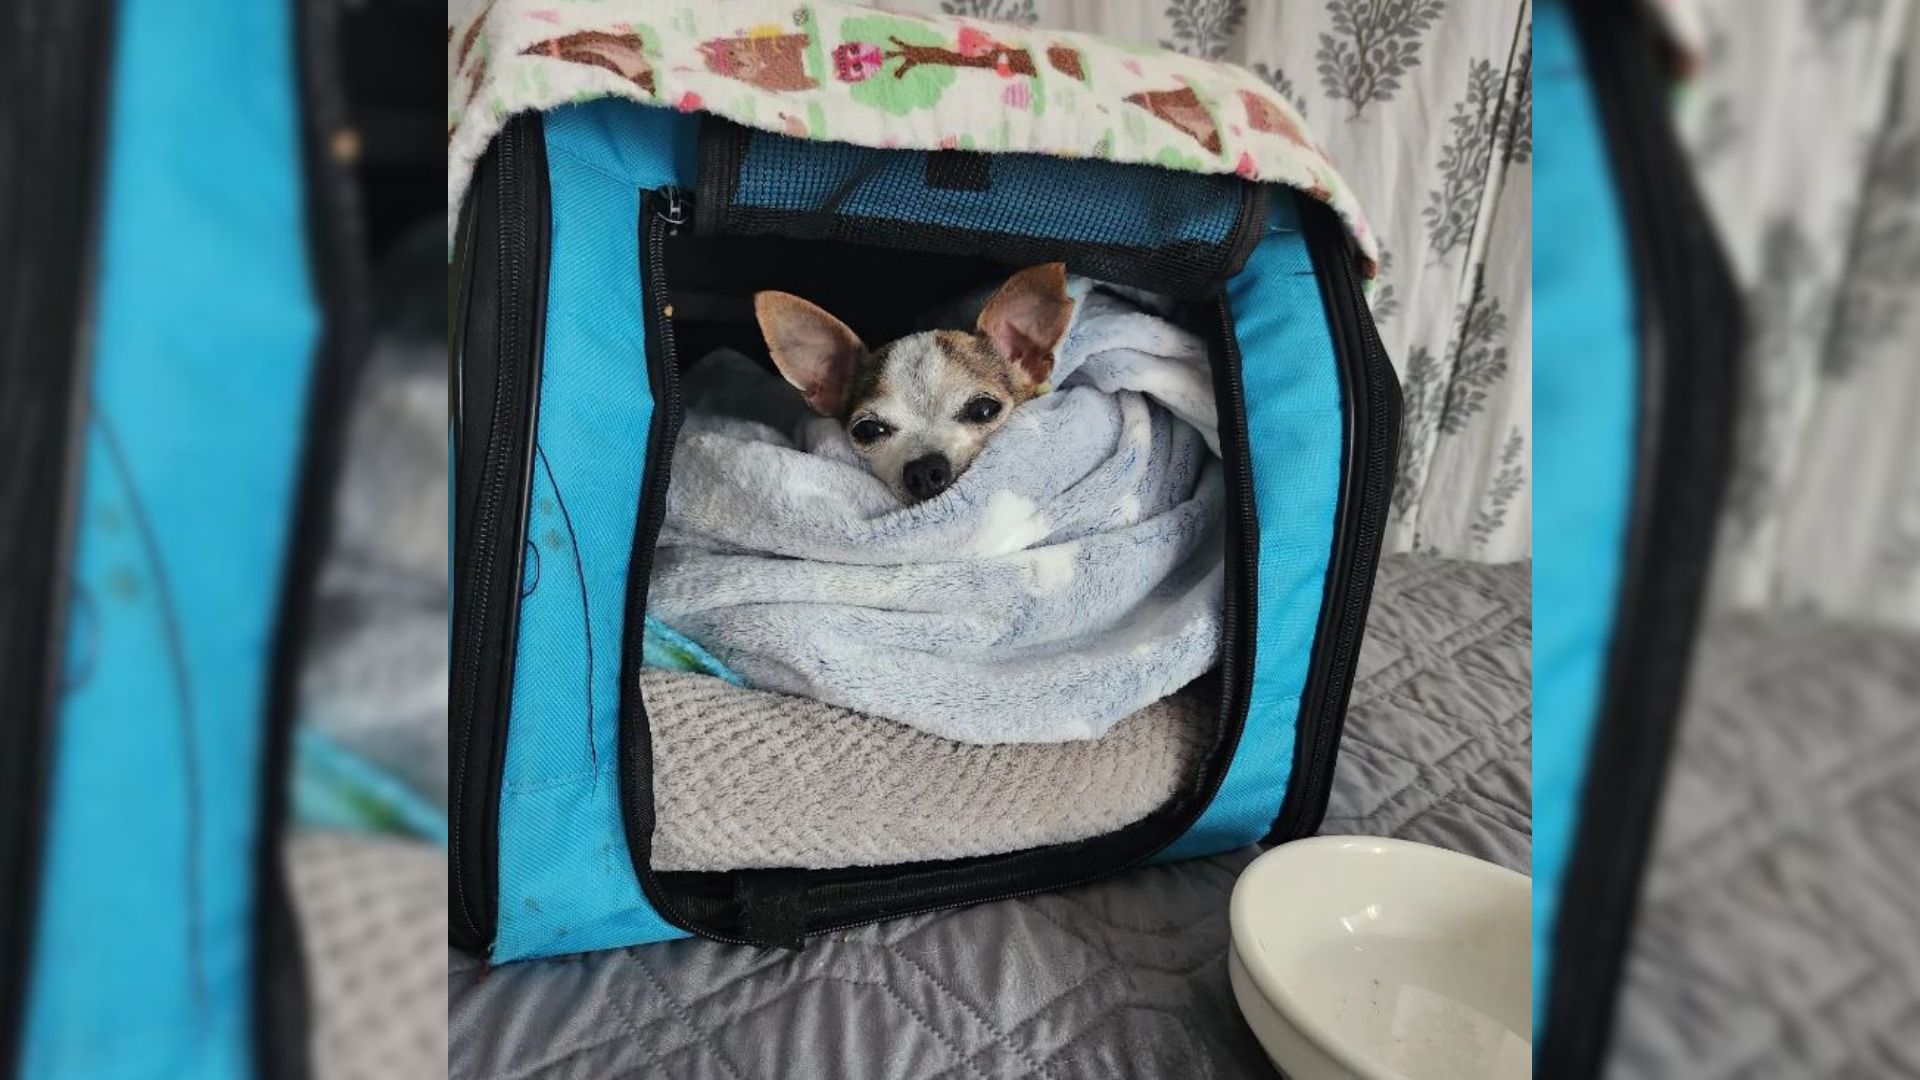 Family Abandons Their Chihuahua After Only Three Days Because ‘He Made The Other Dog Jealous’